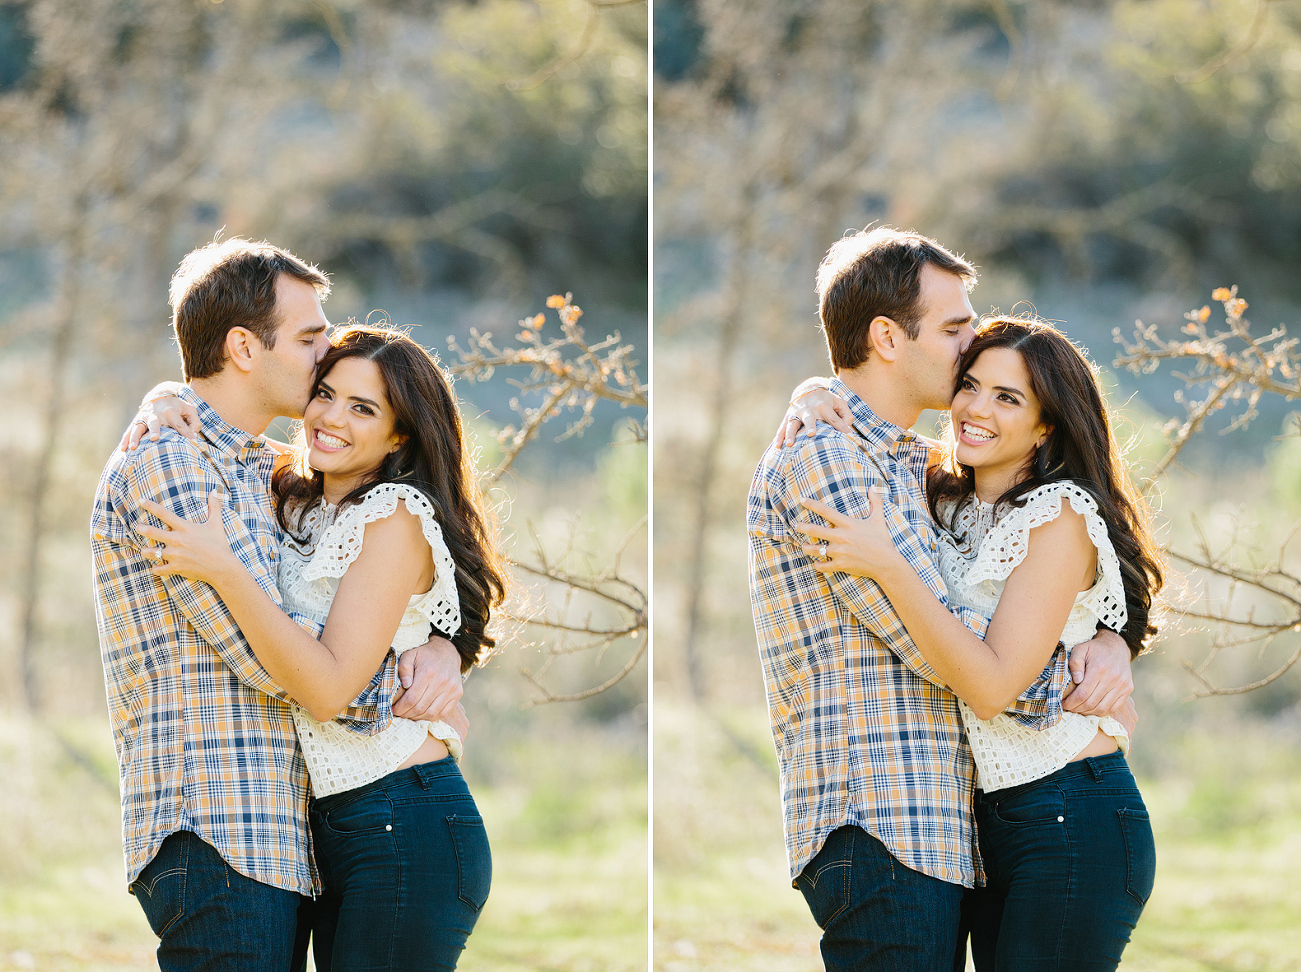 Cute photos of the couple hugging. 